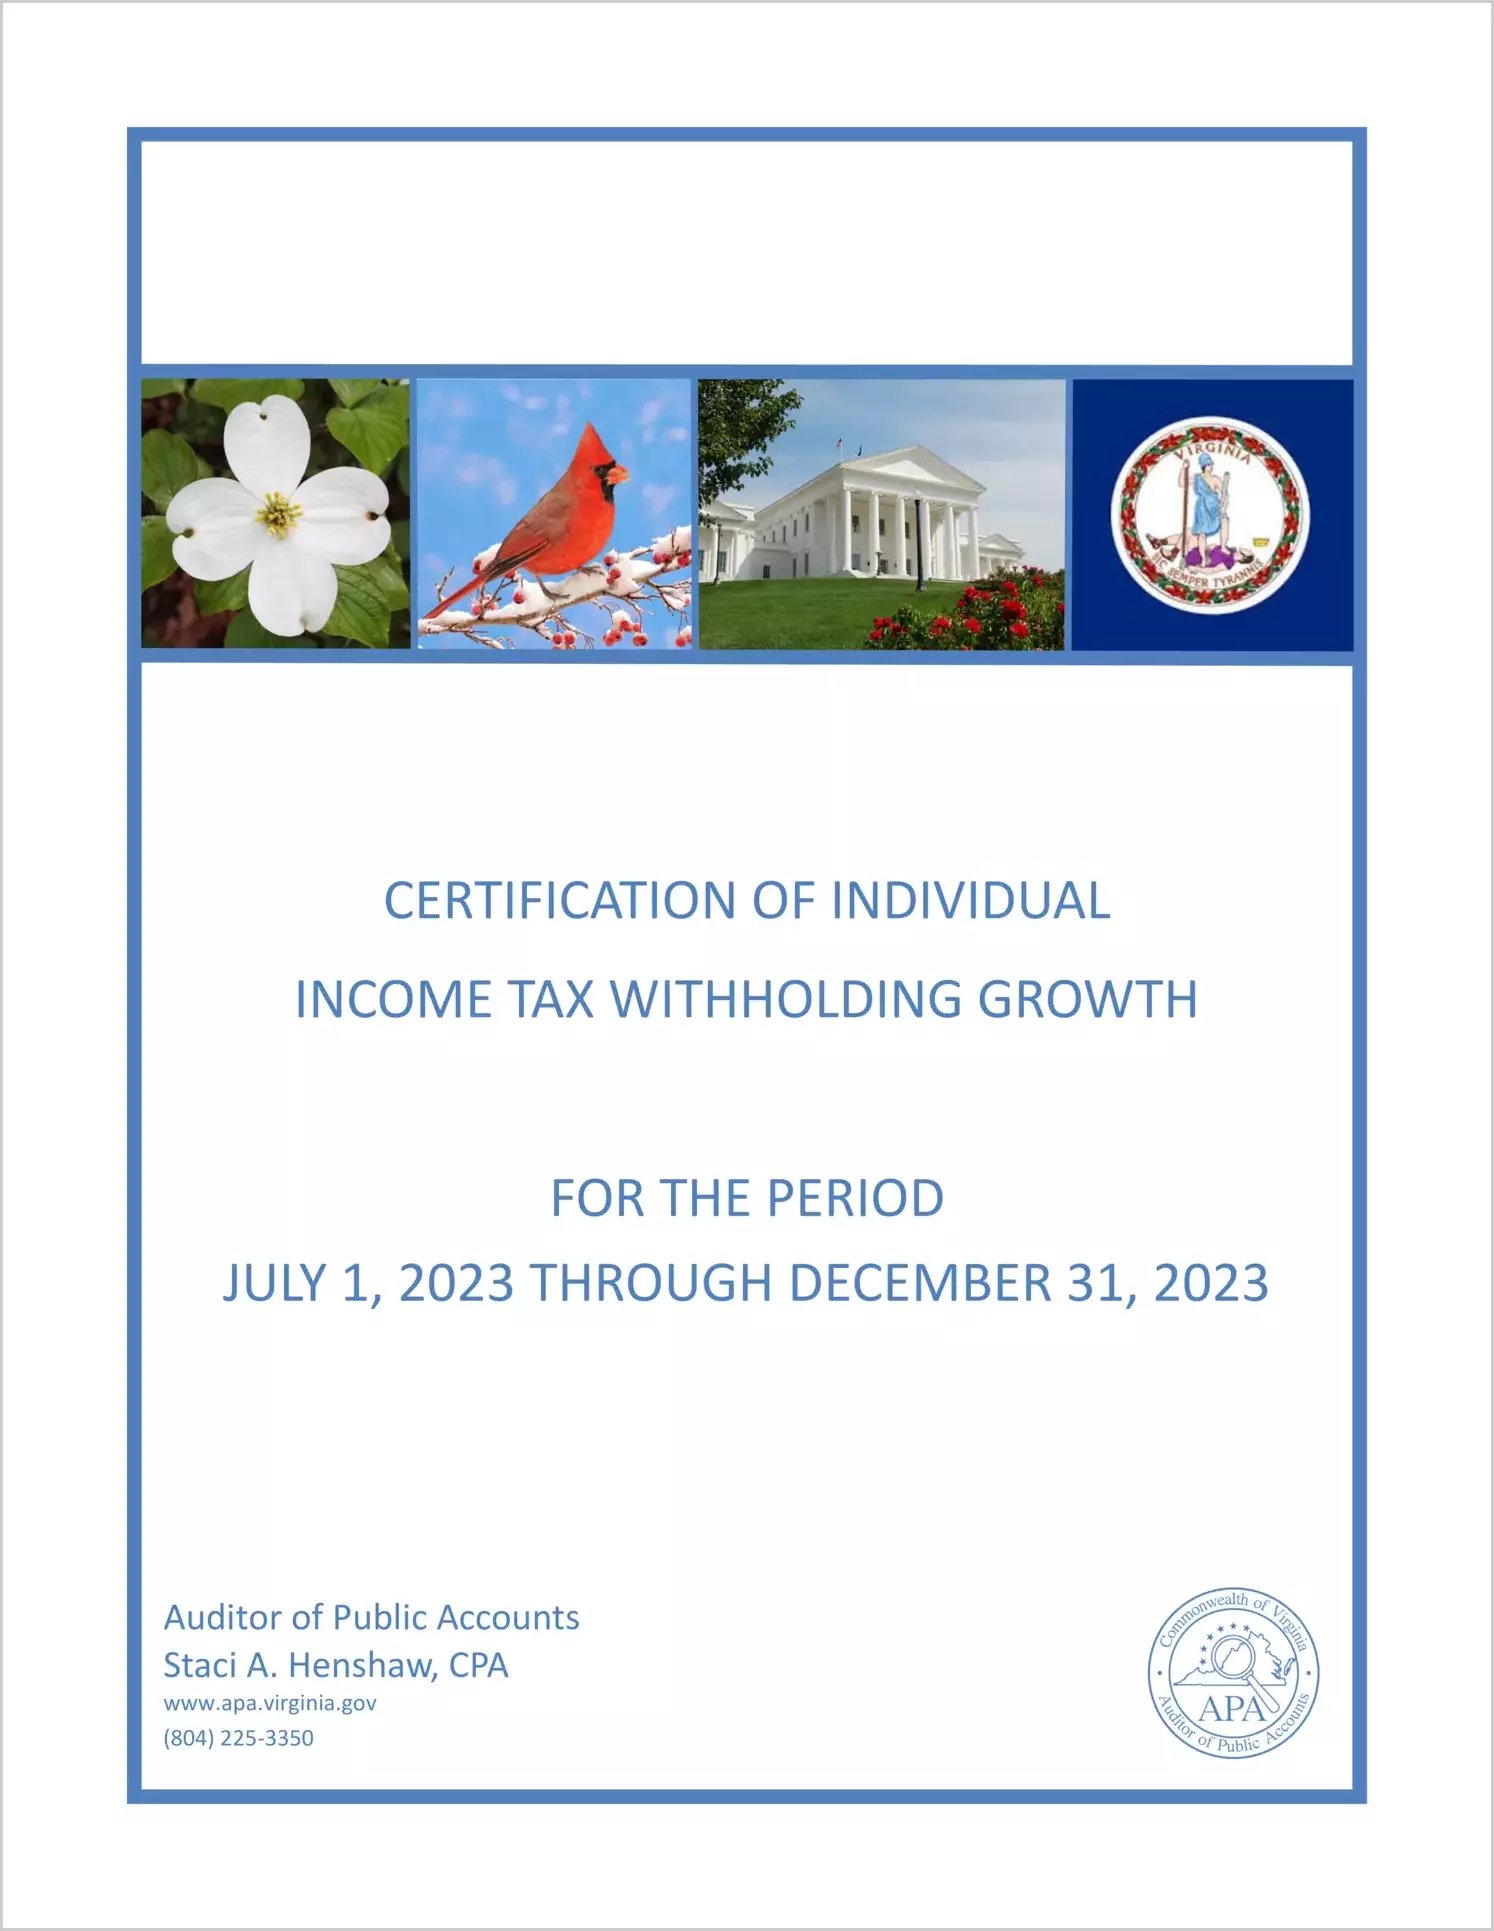 Certification of Individual Tax Withholding Growth 2023 for the period July 1, 2023 through December 31, 2023